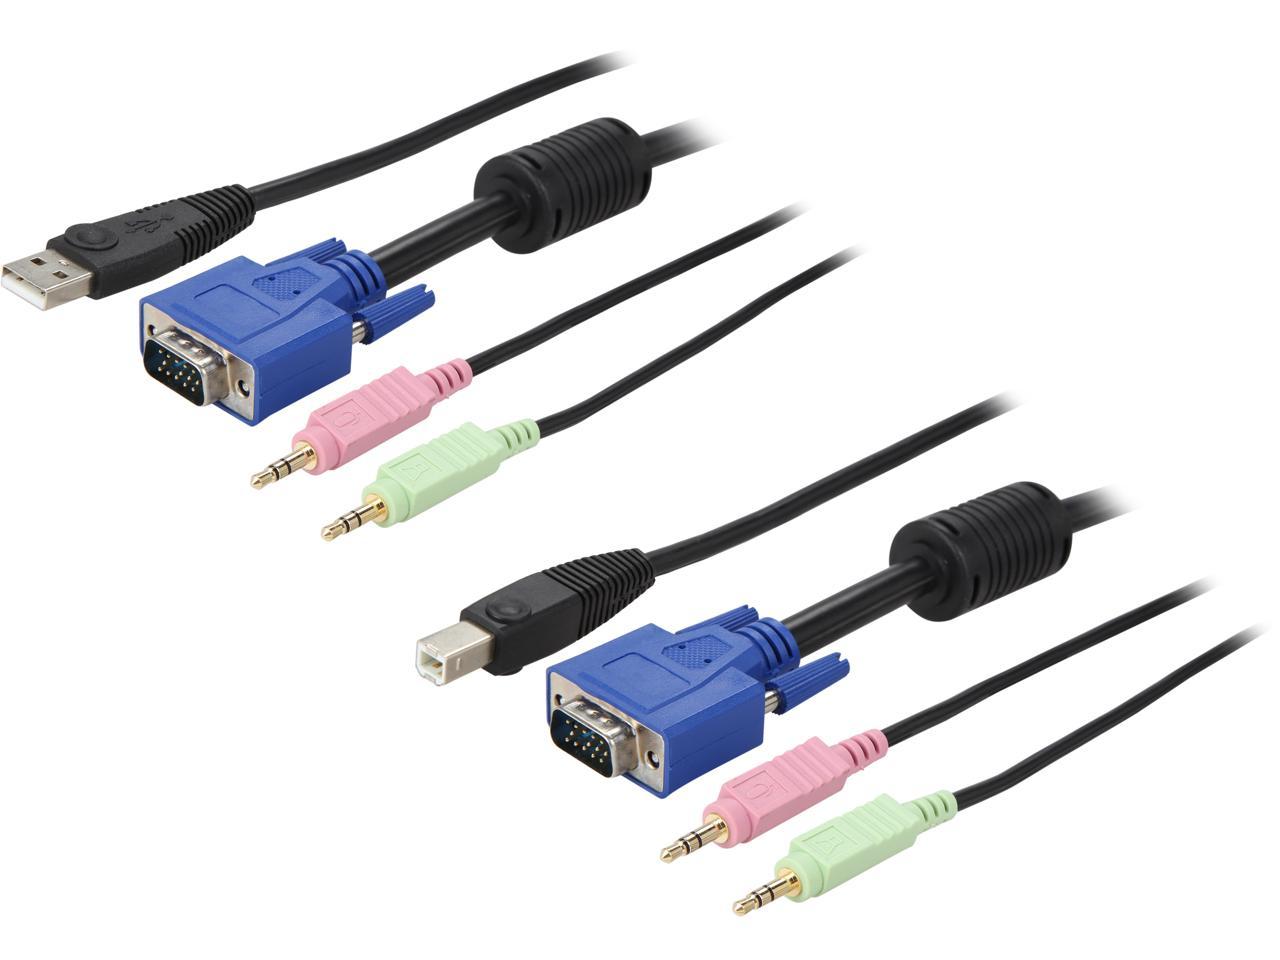 ATHENA CLH-KVM10UVGAAM 10 Feet 4-in-1 USB VGA KVM Switch Cable, with VGA video, USB, 3.5 mm audio and 3.5 mm microphone combined together, transmits 4 kinds of signals all in one single cable.